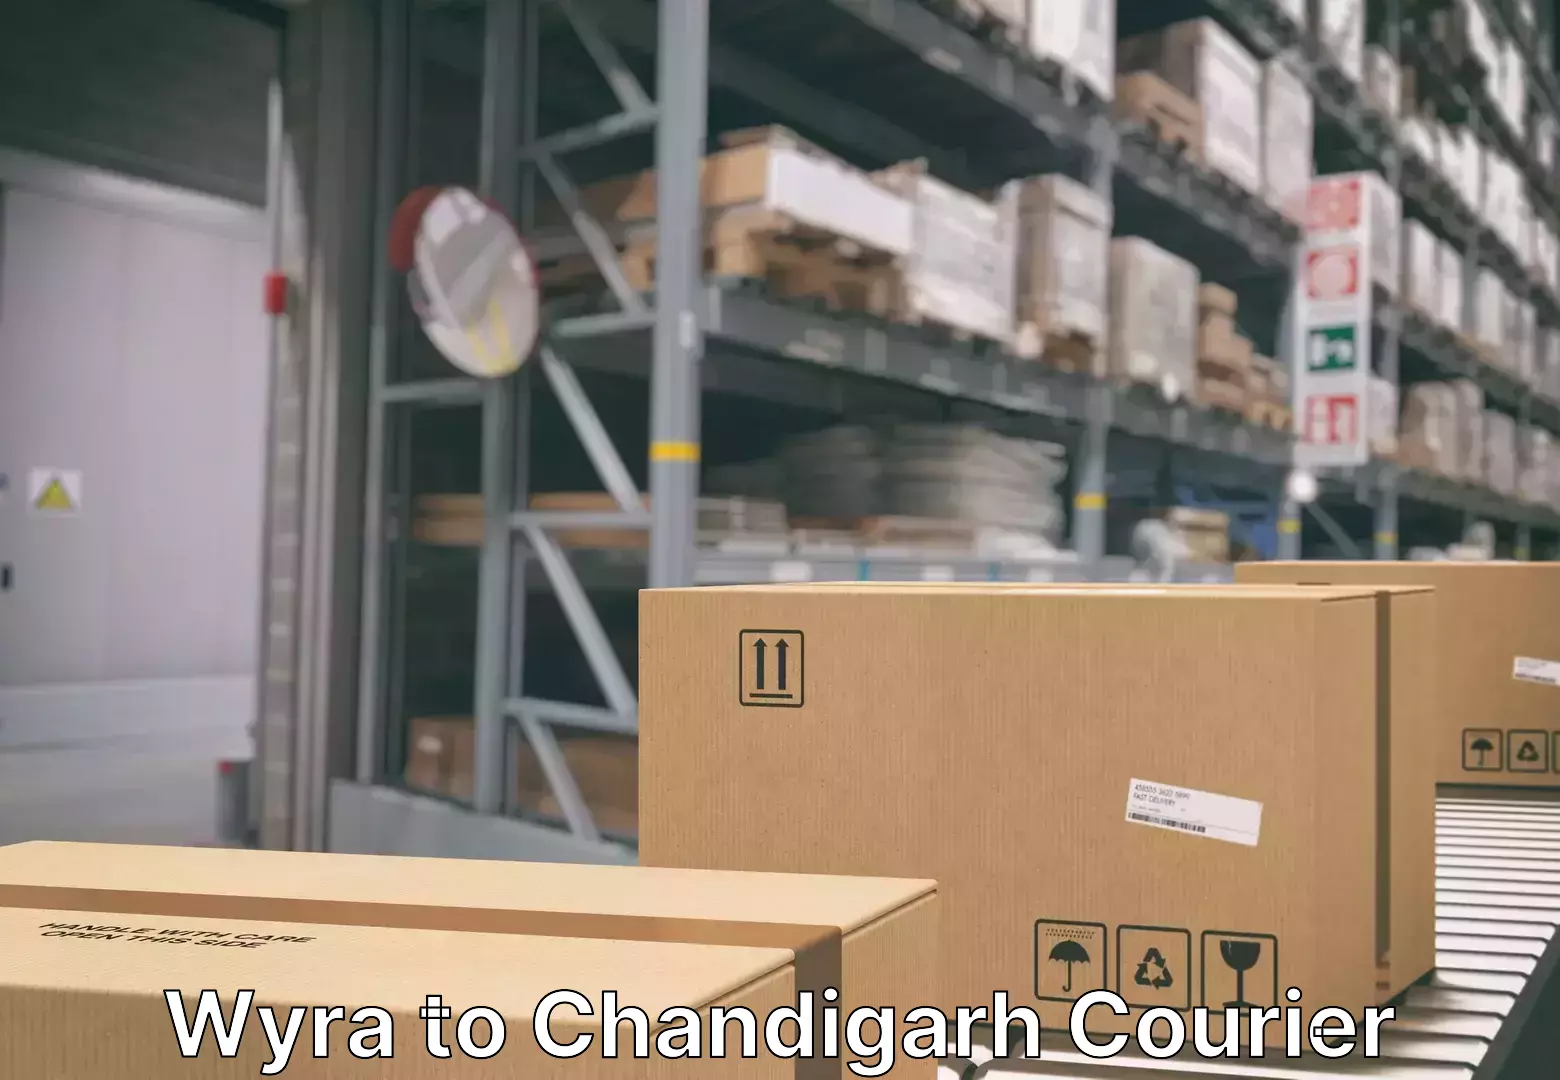 Professional furniture movers Wyra to Chandigarh